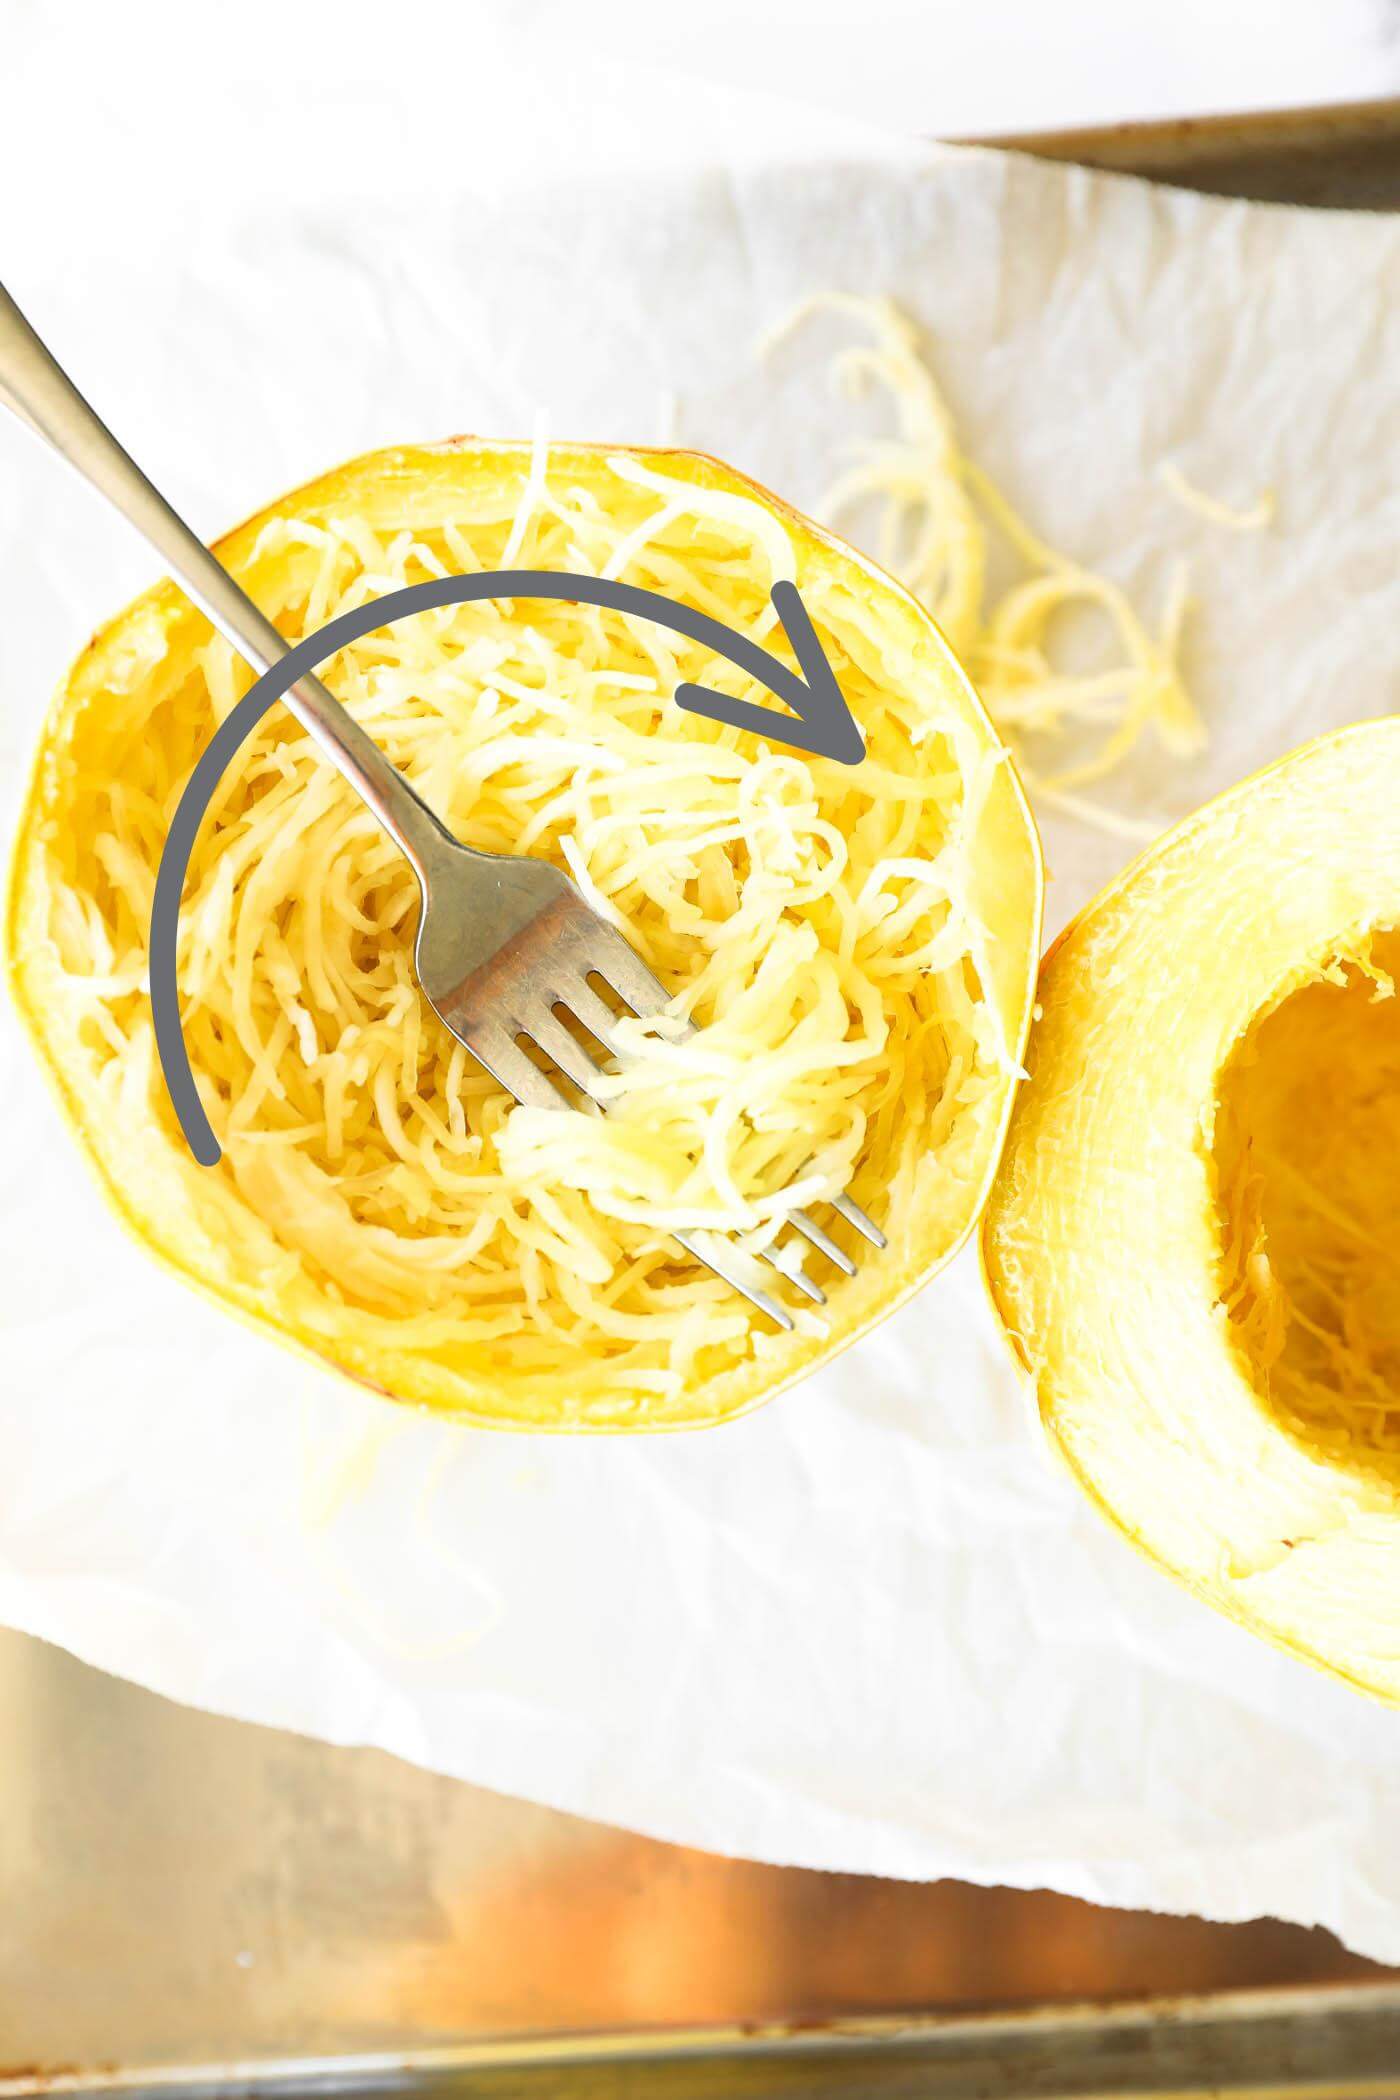 Cooked half of a spaghetti squash with noodles and an arrow showing which direction the noodles grow